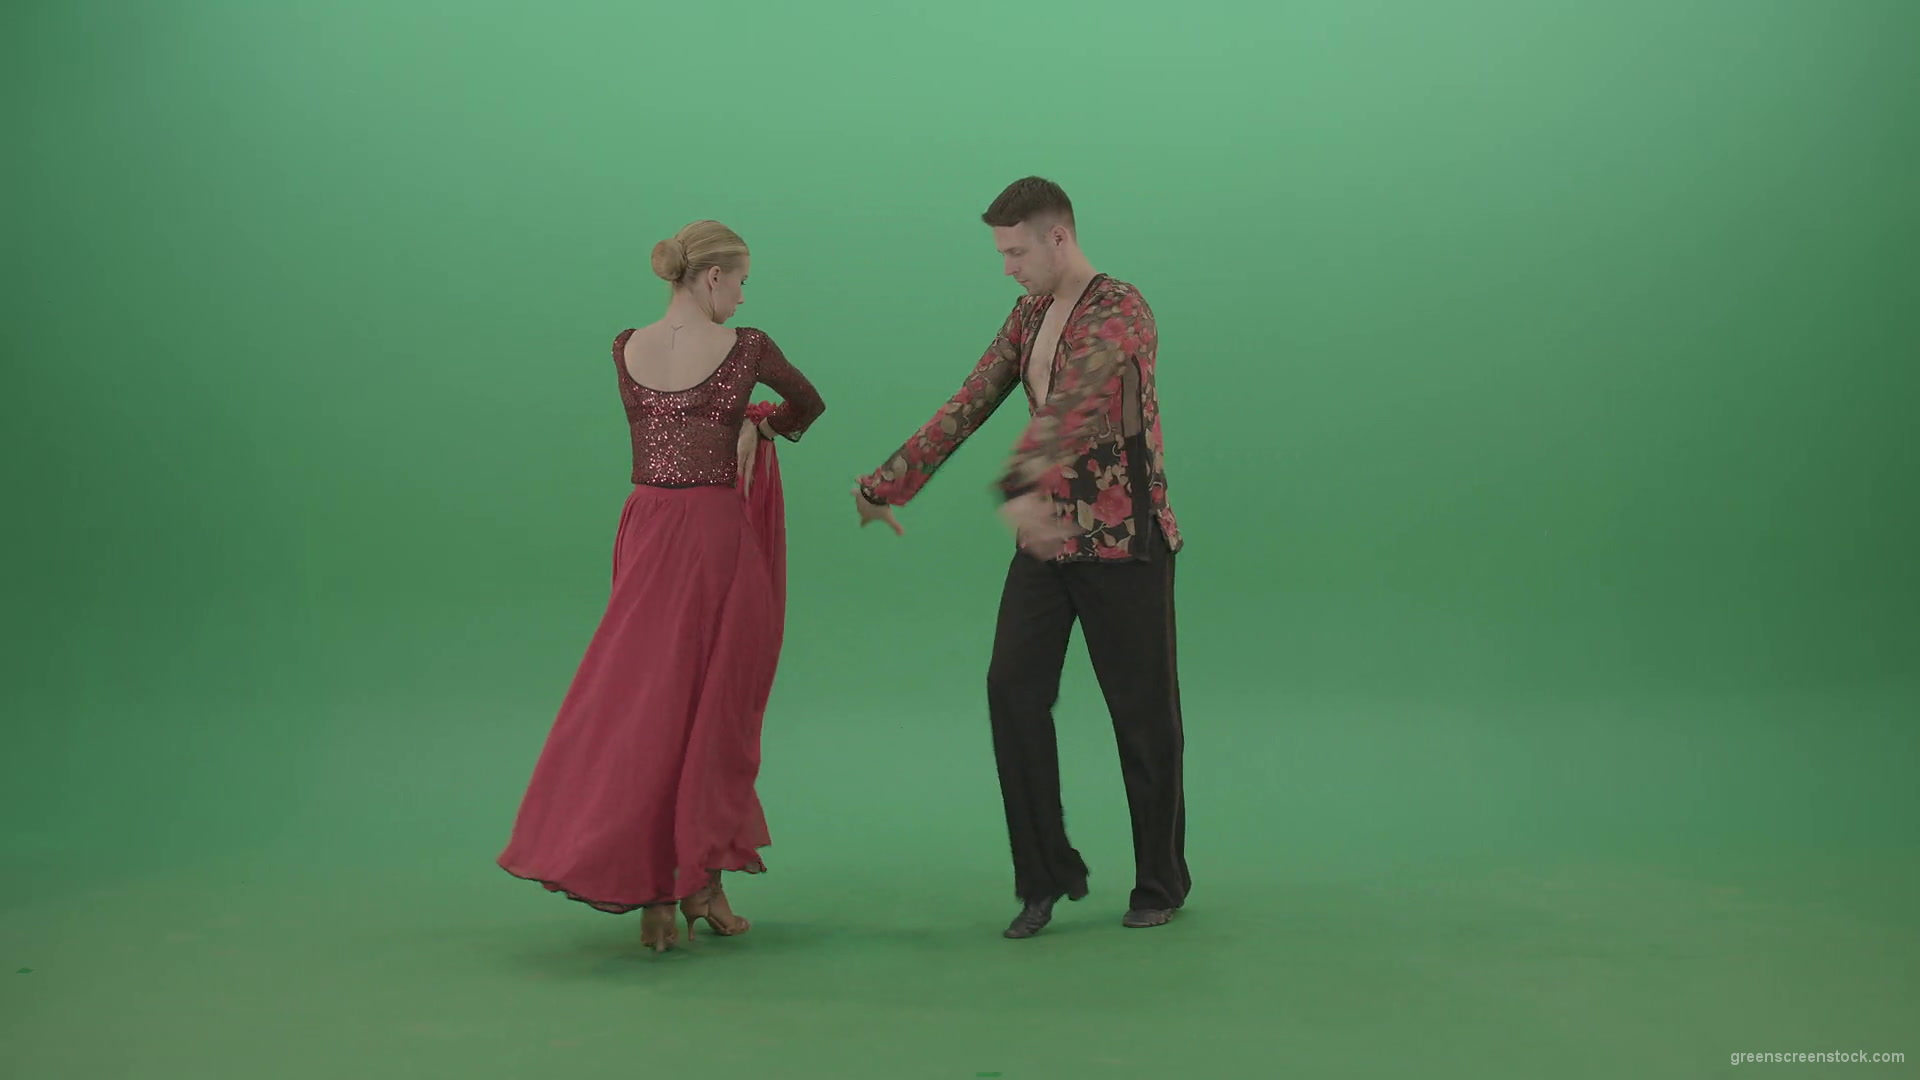 Passion-Couple-dancing-Rumba-Ballroom-dance-and-clapping-in-hands-isolated-on-green-screen-4K-Video-Footage-1920_005 Green Screen Stock